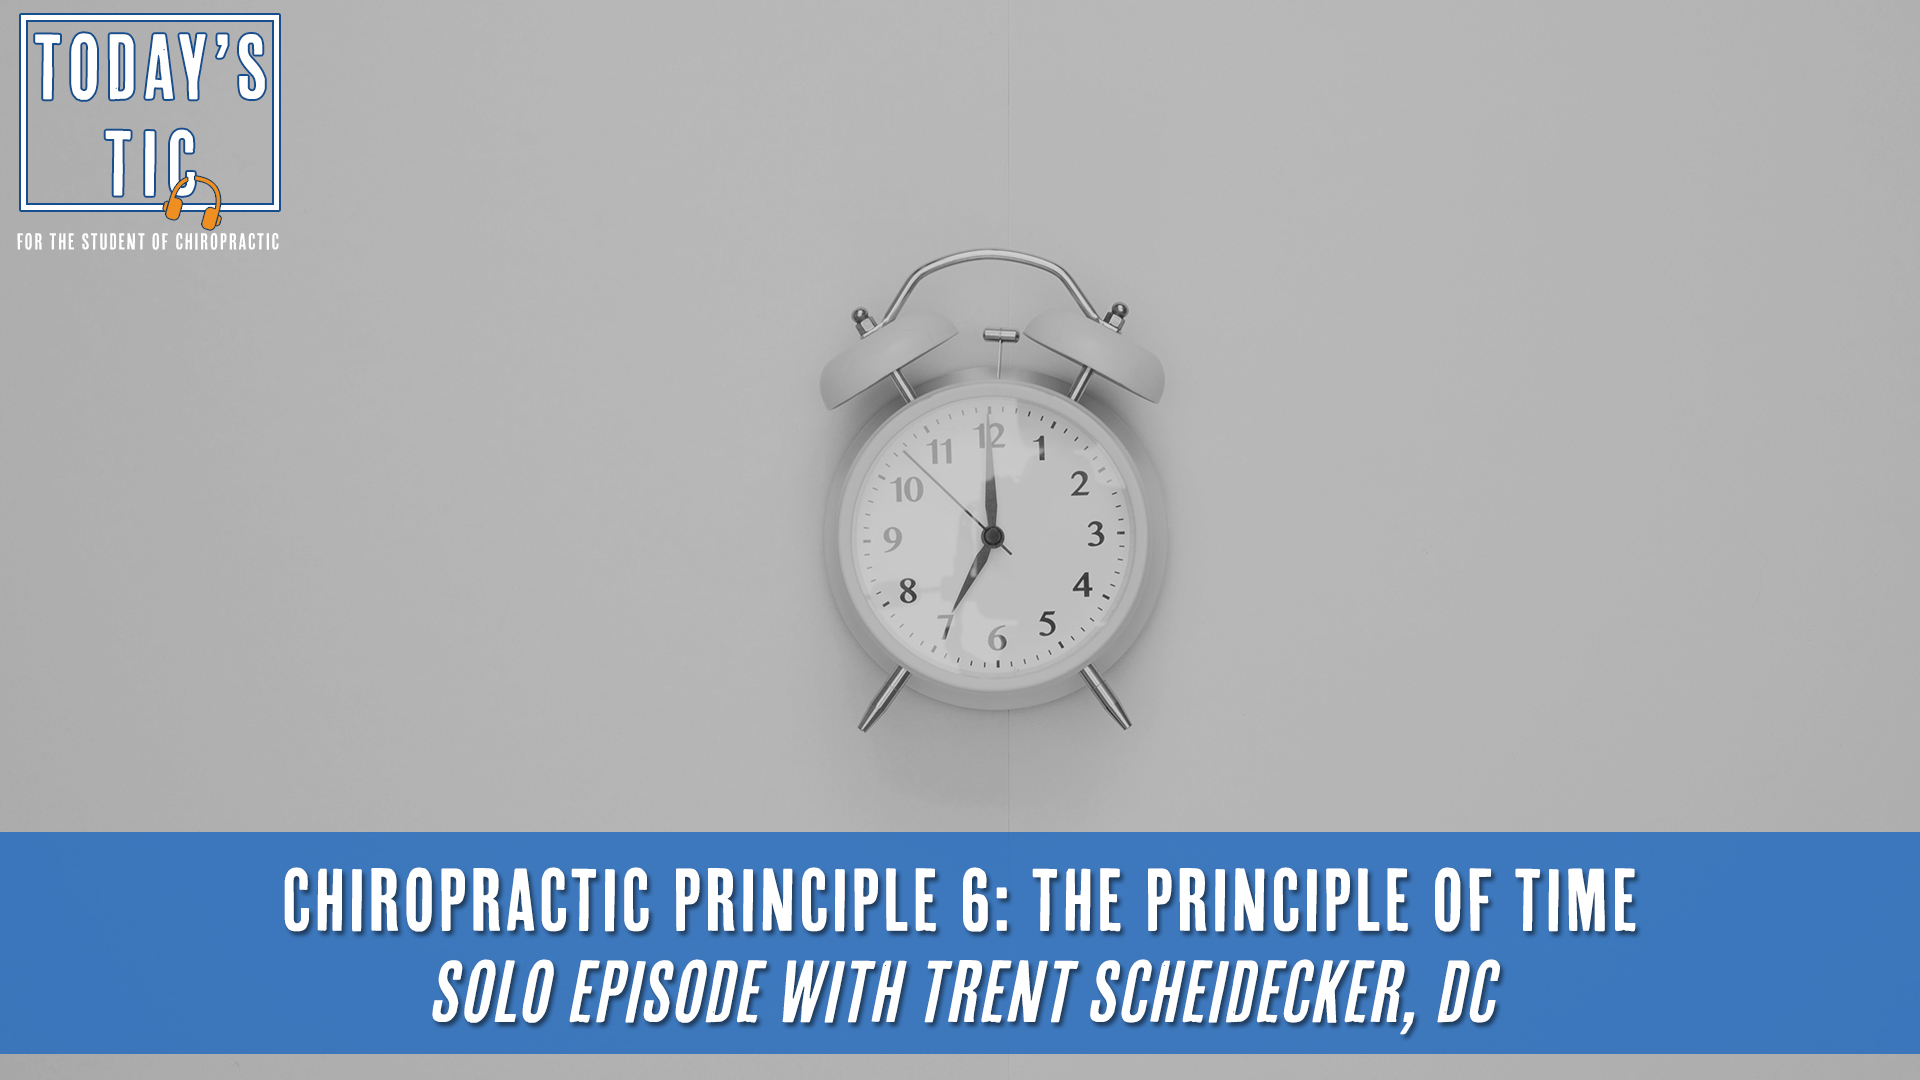 Chiropractic Principle 6: The Principle of Time